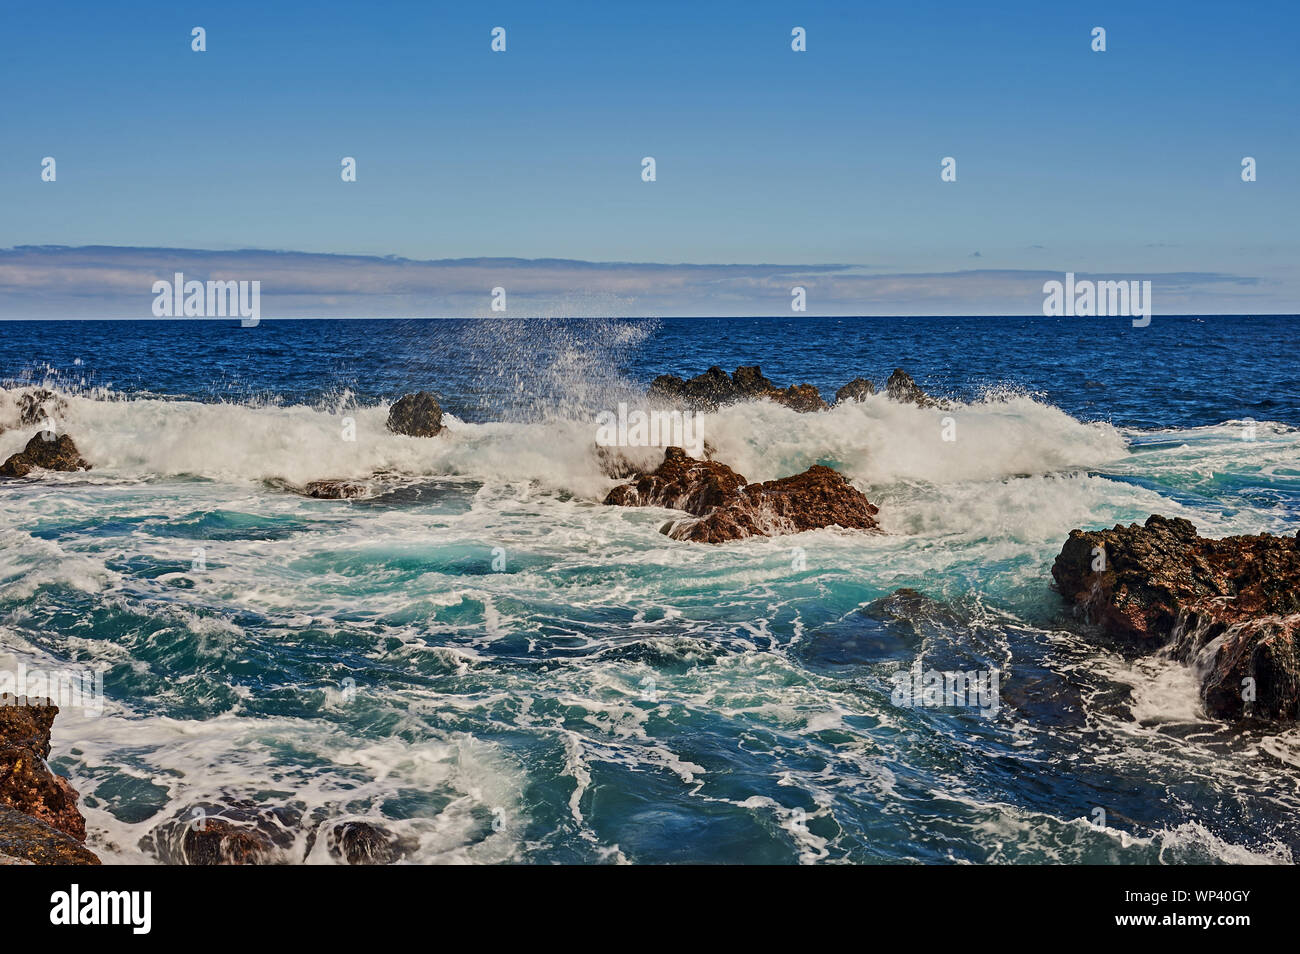 Atlantic Ocean and waves breaking along a rugged coastline. Madeira Stock Photo